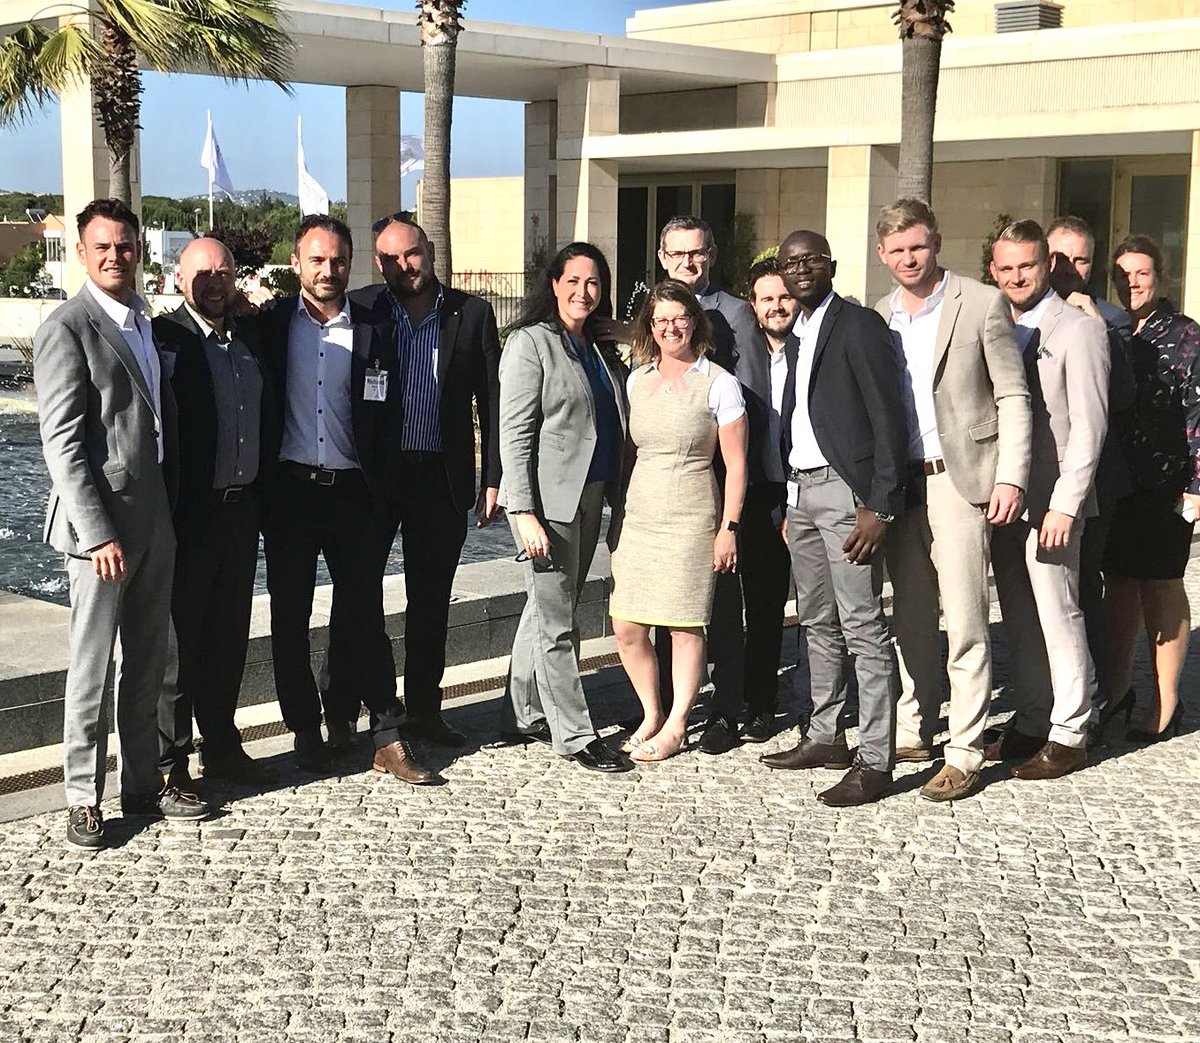 SuperU4 unite in Portugal for the EURental meeting #BigThingsToCome #AnExcitingTimeToWorkForERAC #FY19IsGoingToBeAnExcitingOne ☄️🌴🤩